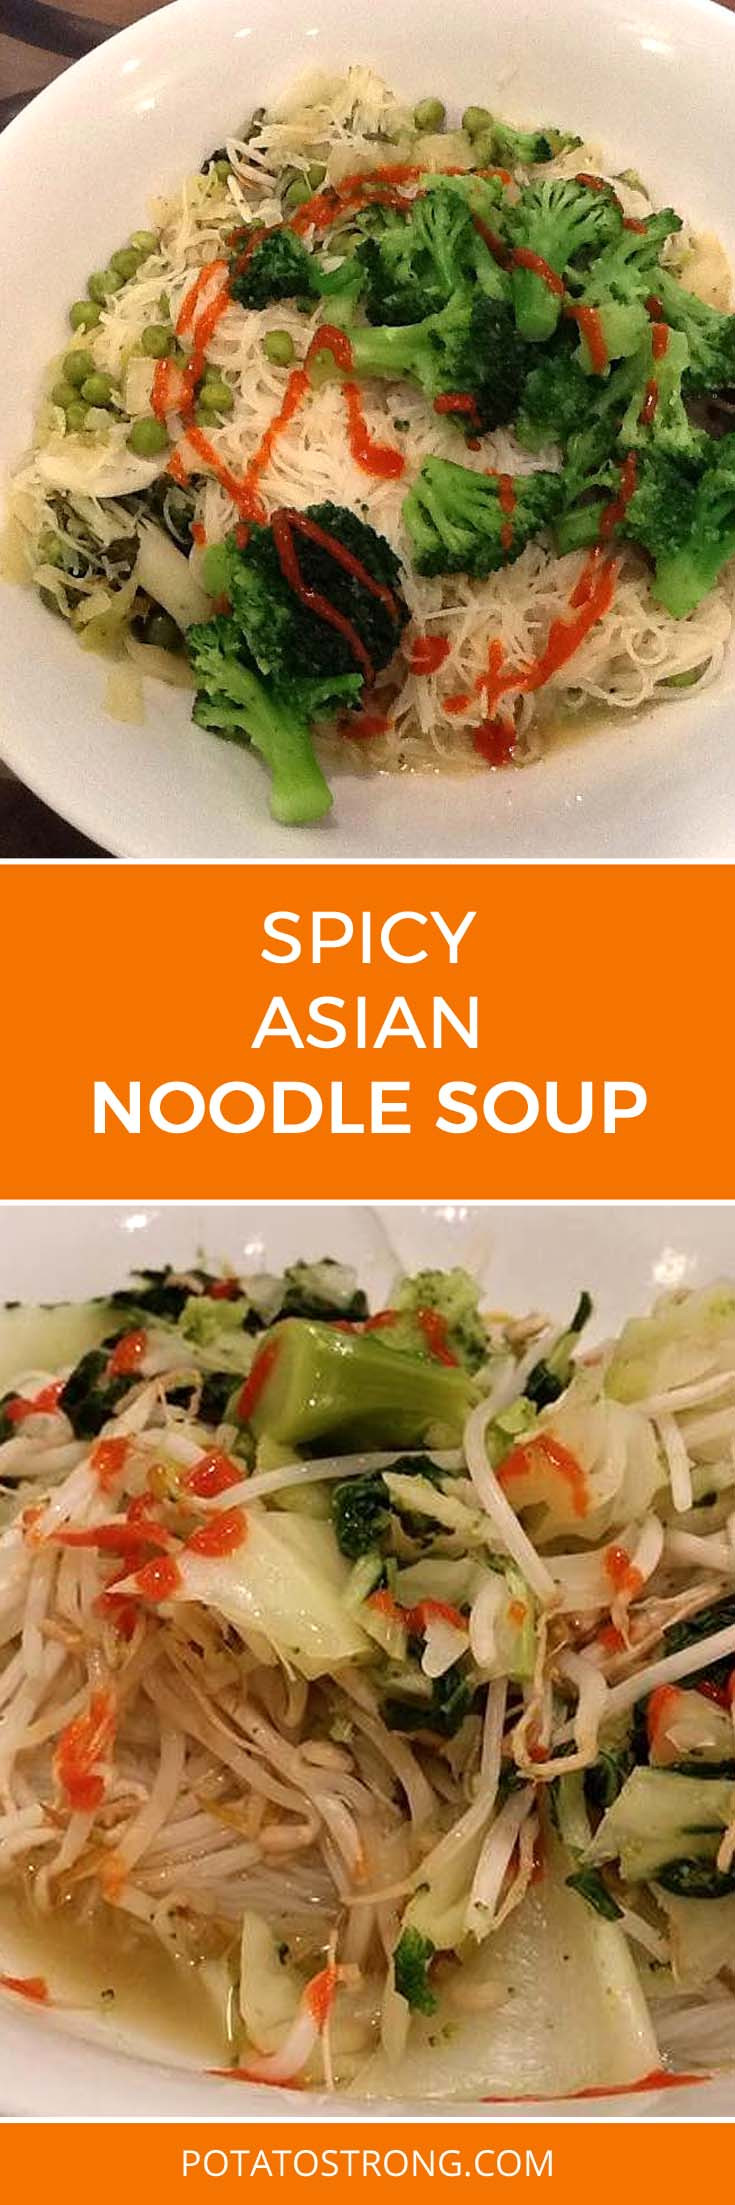 Asian Plant Based Recipes
 Plant Based Diet Spicy Asian Soup Potato Strong